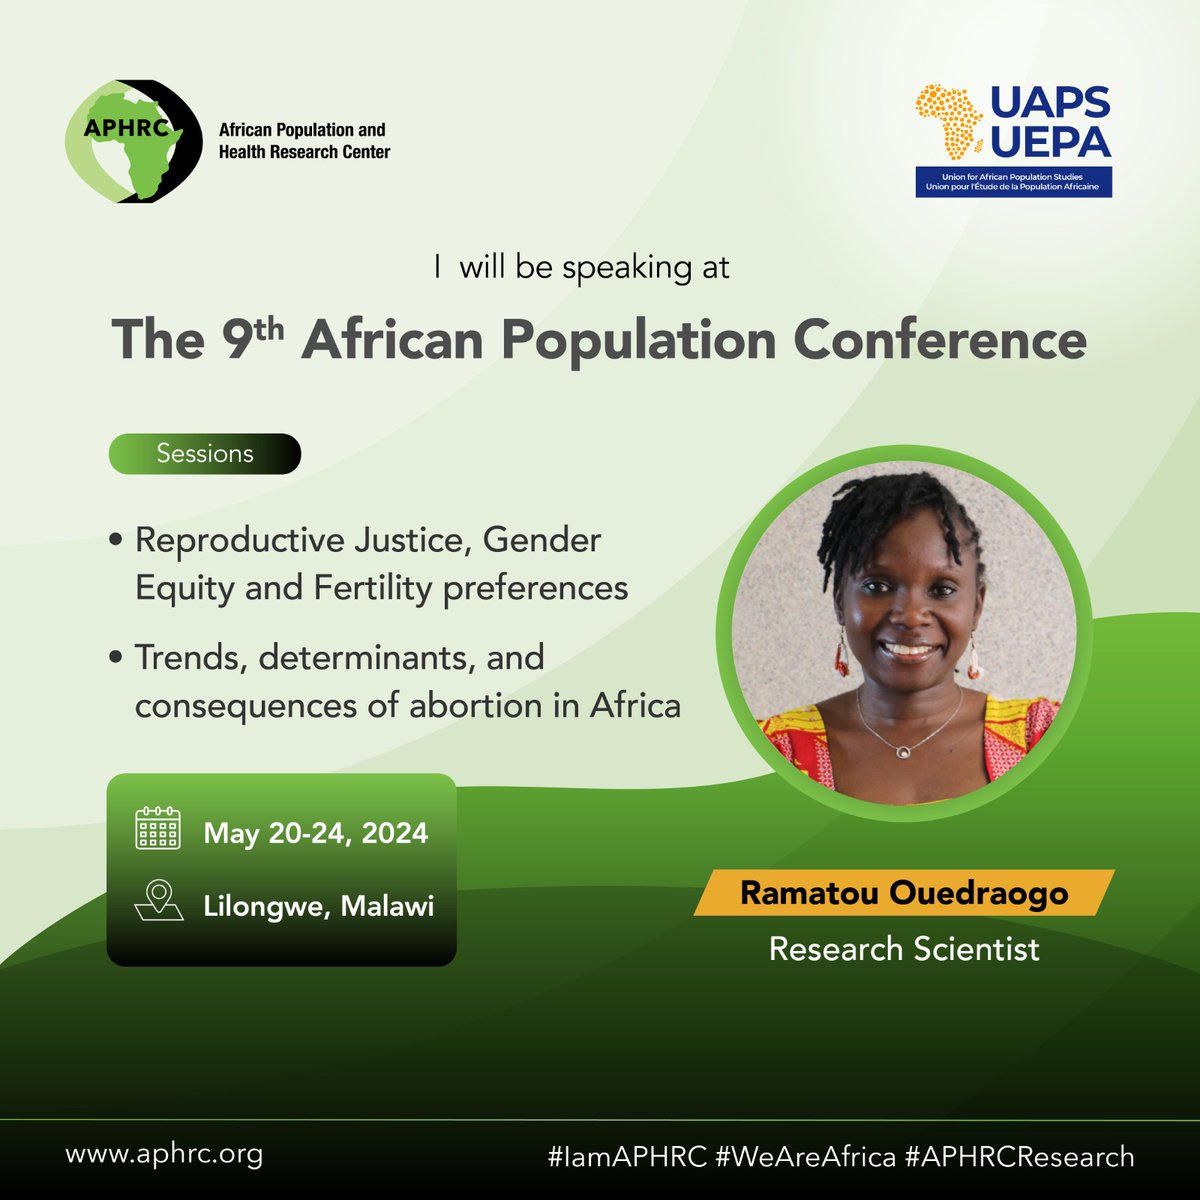 APHRC at the 9th  African Population Conference by @UAPS_UEPA.

Ramatou will be sharing insights on how reproductive injustice can lead to infanticide & abortion and methods used in informal settlements in Nairobi, Kenya.

#APC2024 #9thAPC
#APCMalawi #WeAreAfrica #APHRCResearch